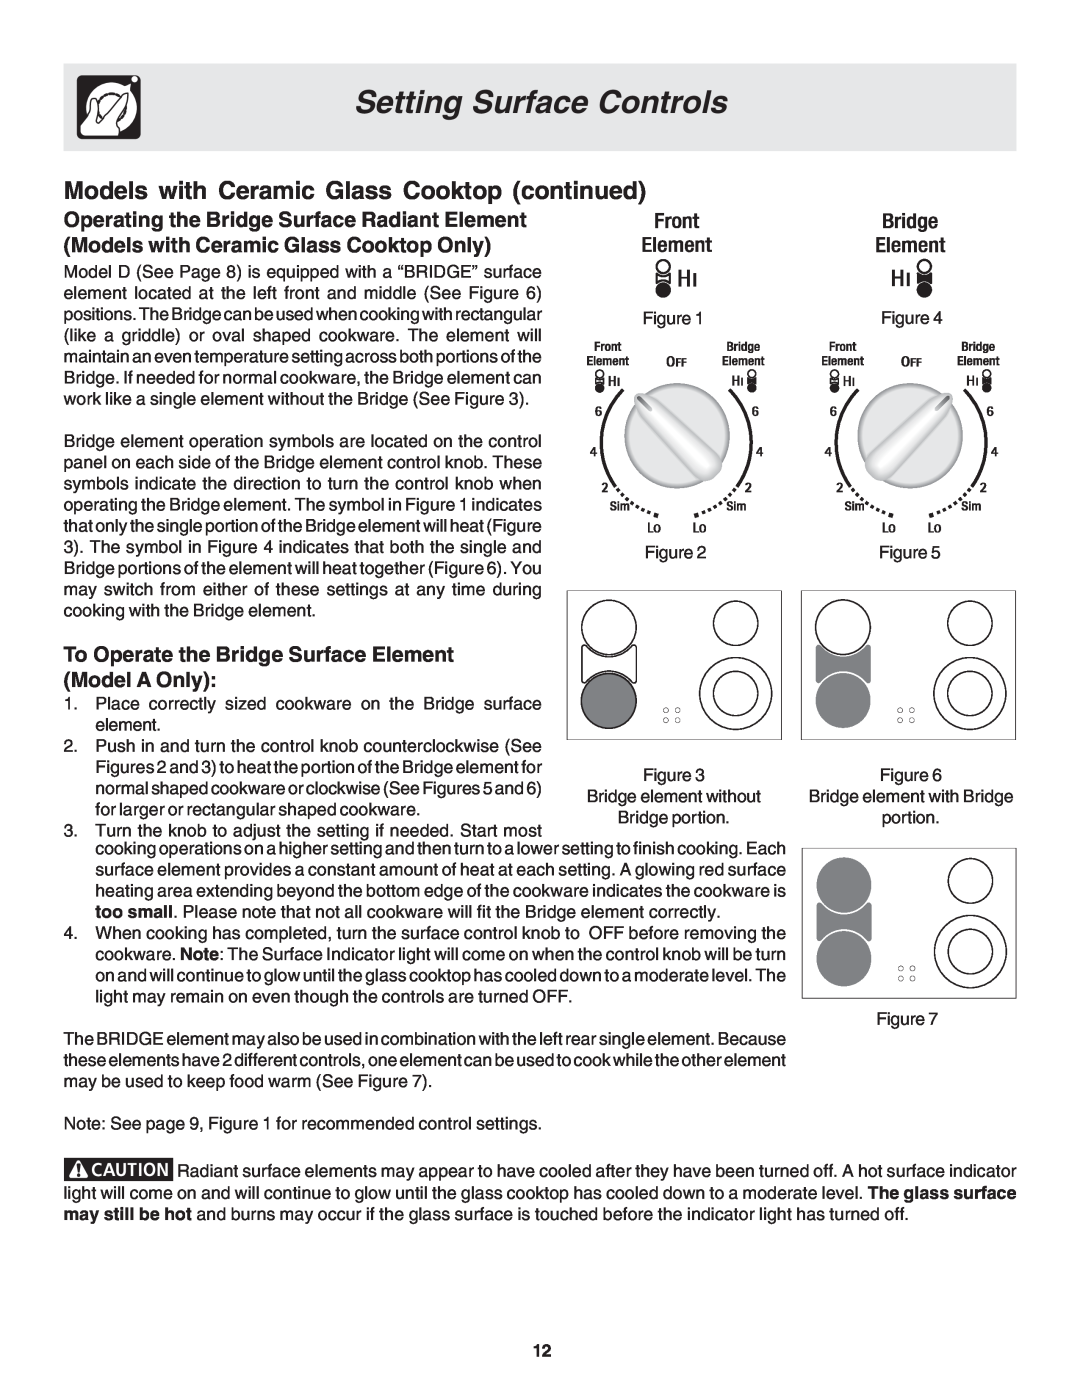 Electrolux Slide-in, Drop-in manual To Operate the Bridge Surface Element, Model A Only, Setting Surface Controls 